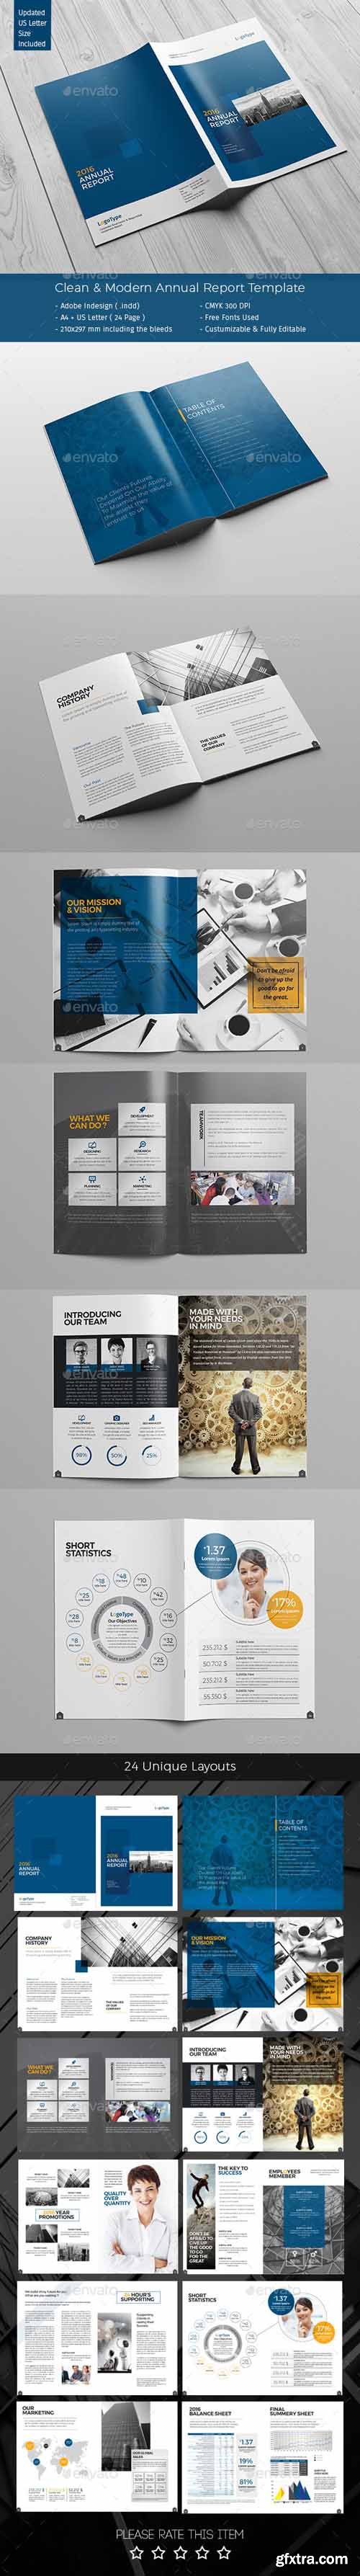 GR - Annual Report Template 12313507